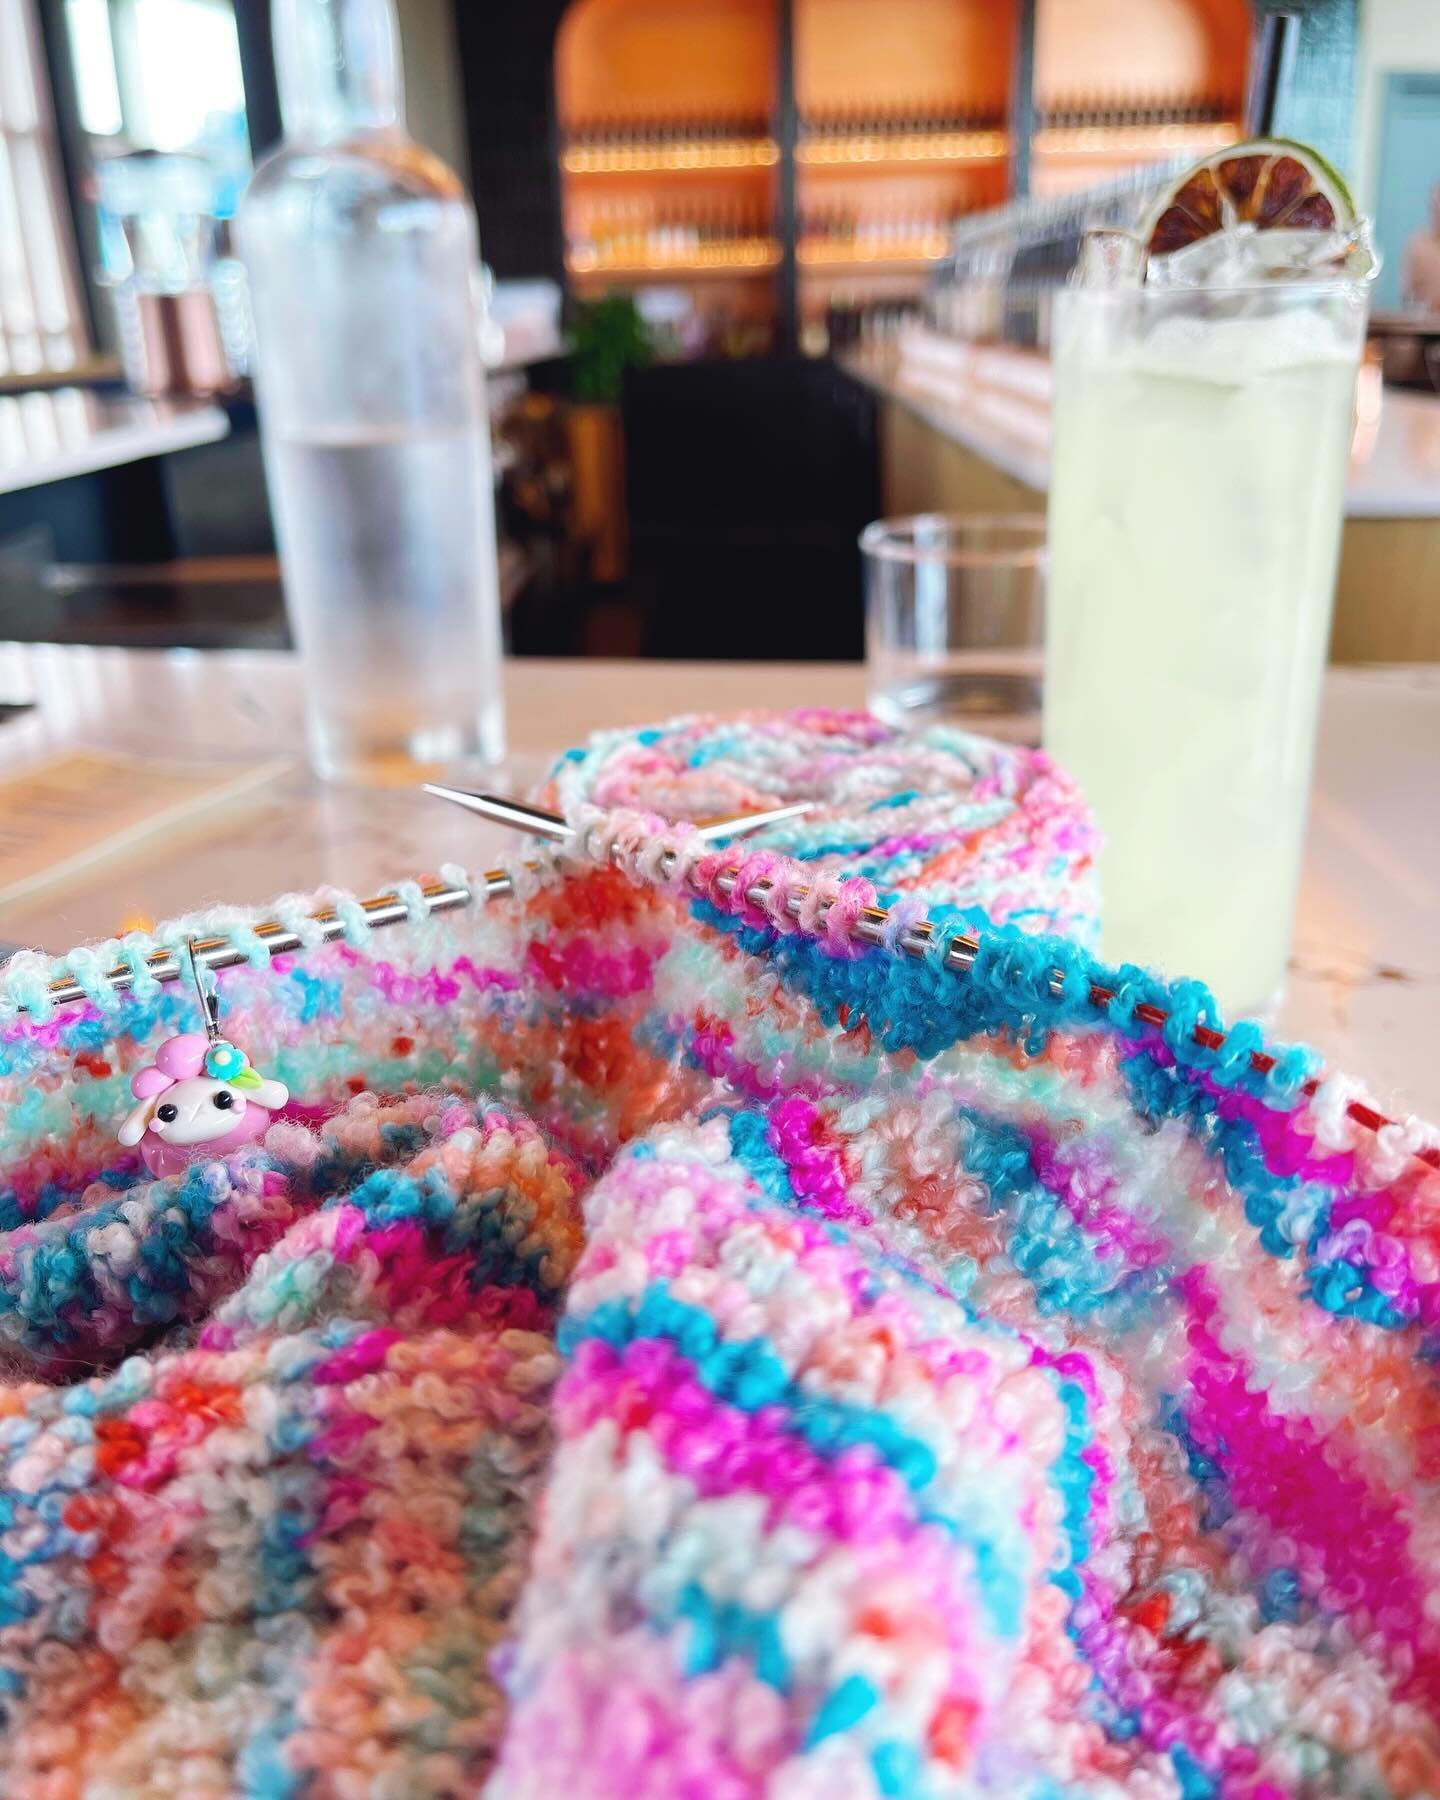 We&rsquo;re back home from our trip to Louisville by way of Pittsburgh followed by Columbus, OH, so here are a select few photos of all the knitting I did with drinks in my hand plus a few extras. 

I&rsquo;m tired and dreading work tomorrow, and the